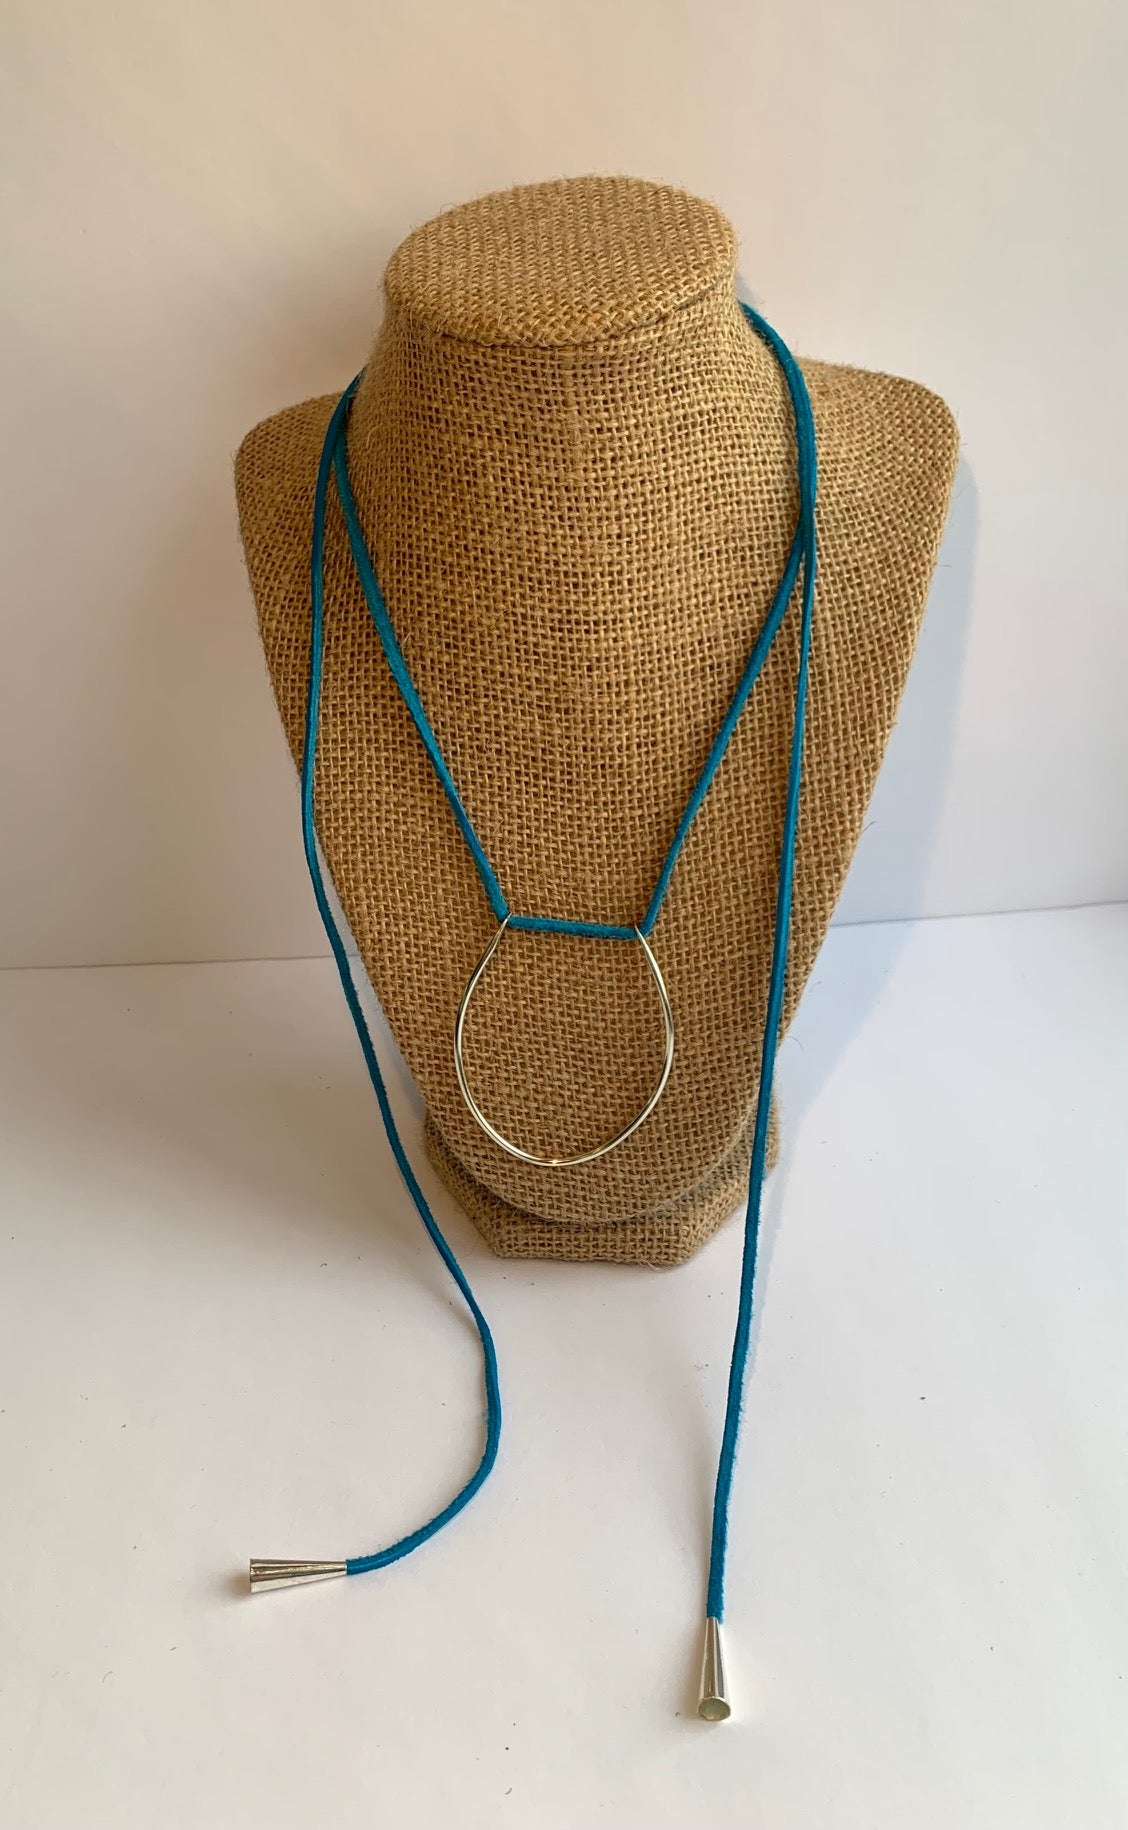 moon phase - turquoise - necklace